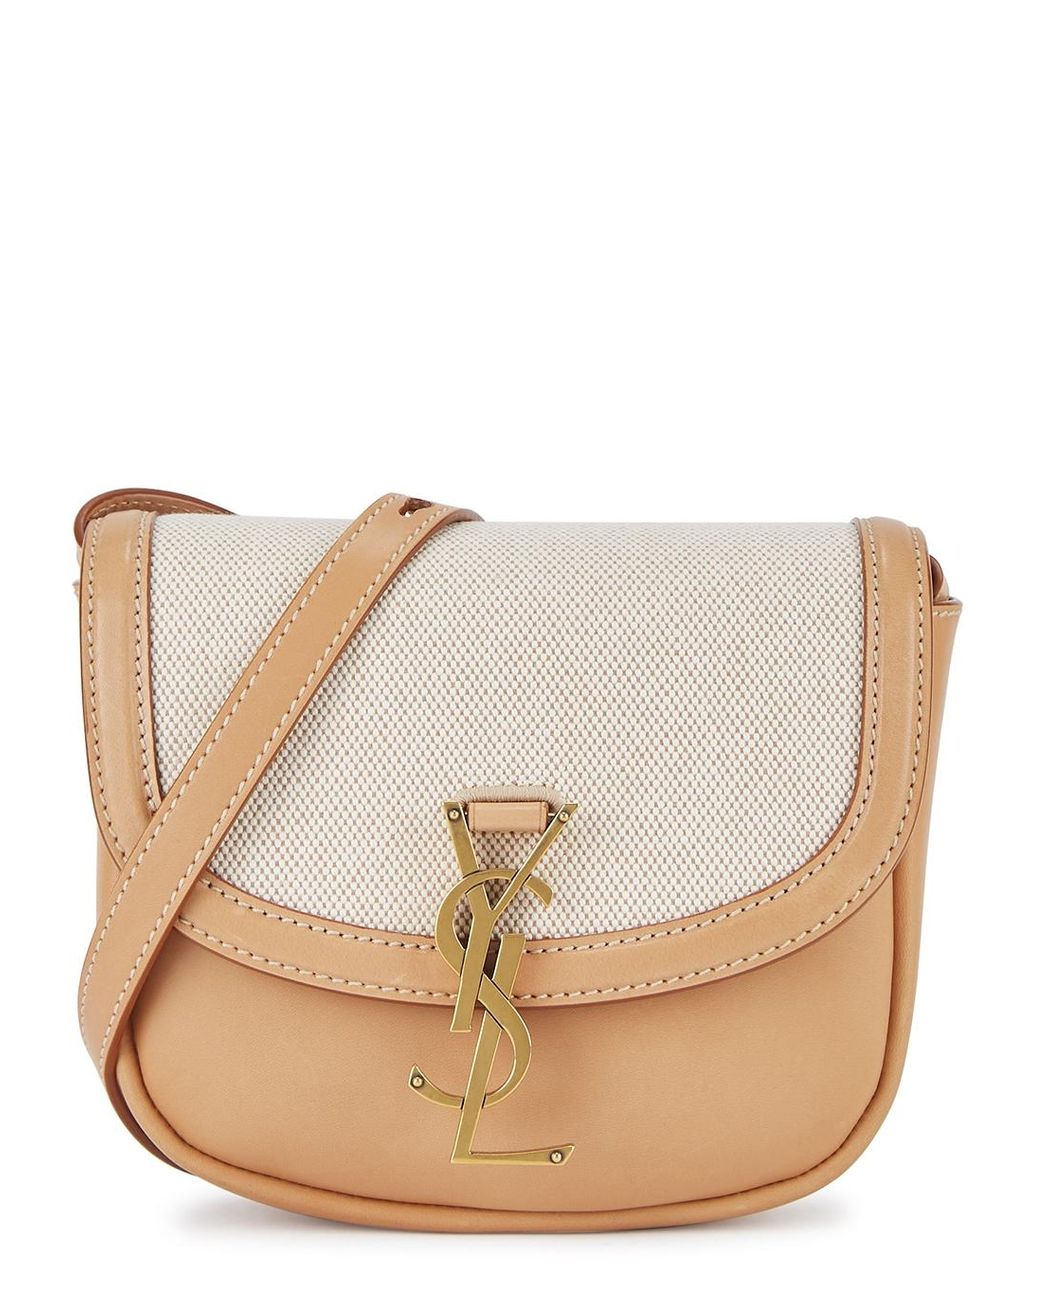 Saint Laurent Kaia Light Brown Leather Cross-body Bag in Natural | Lyst